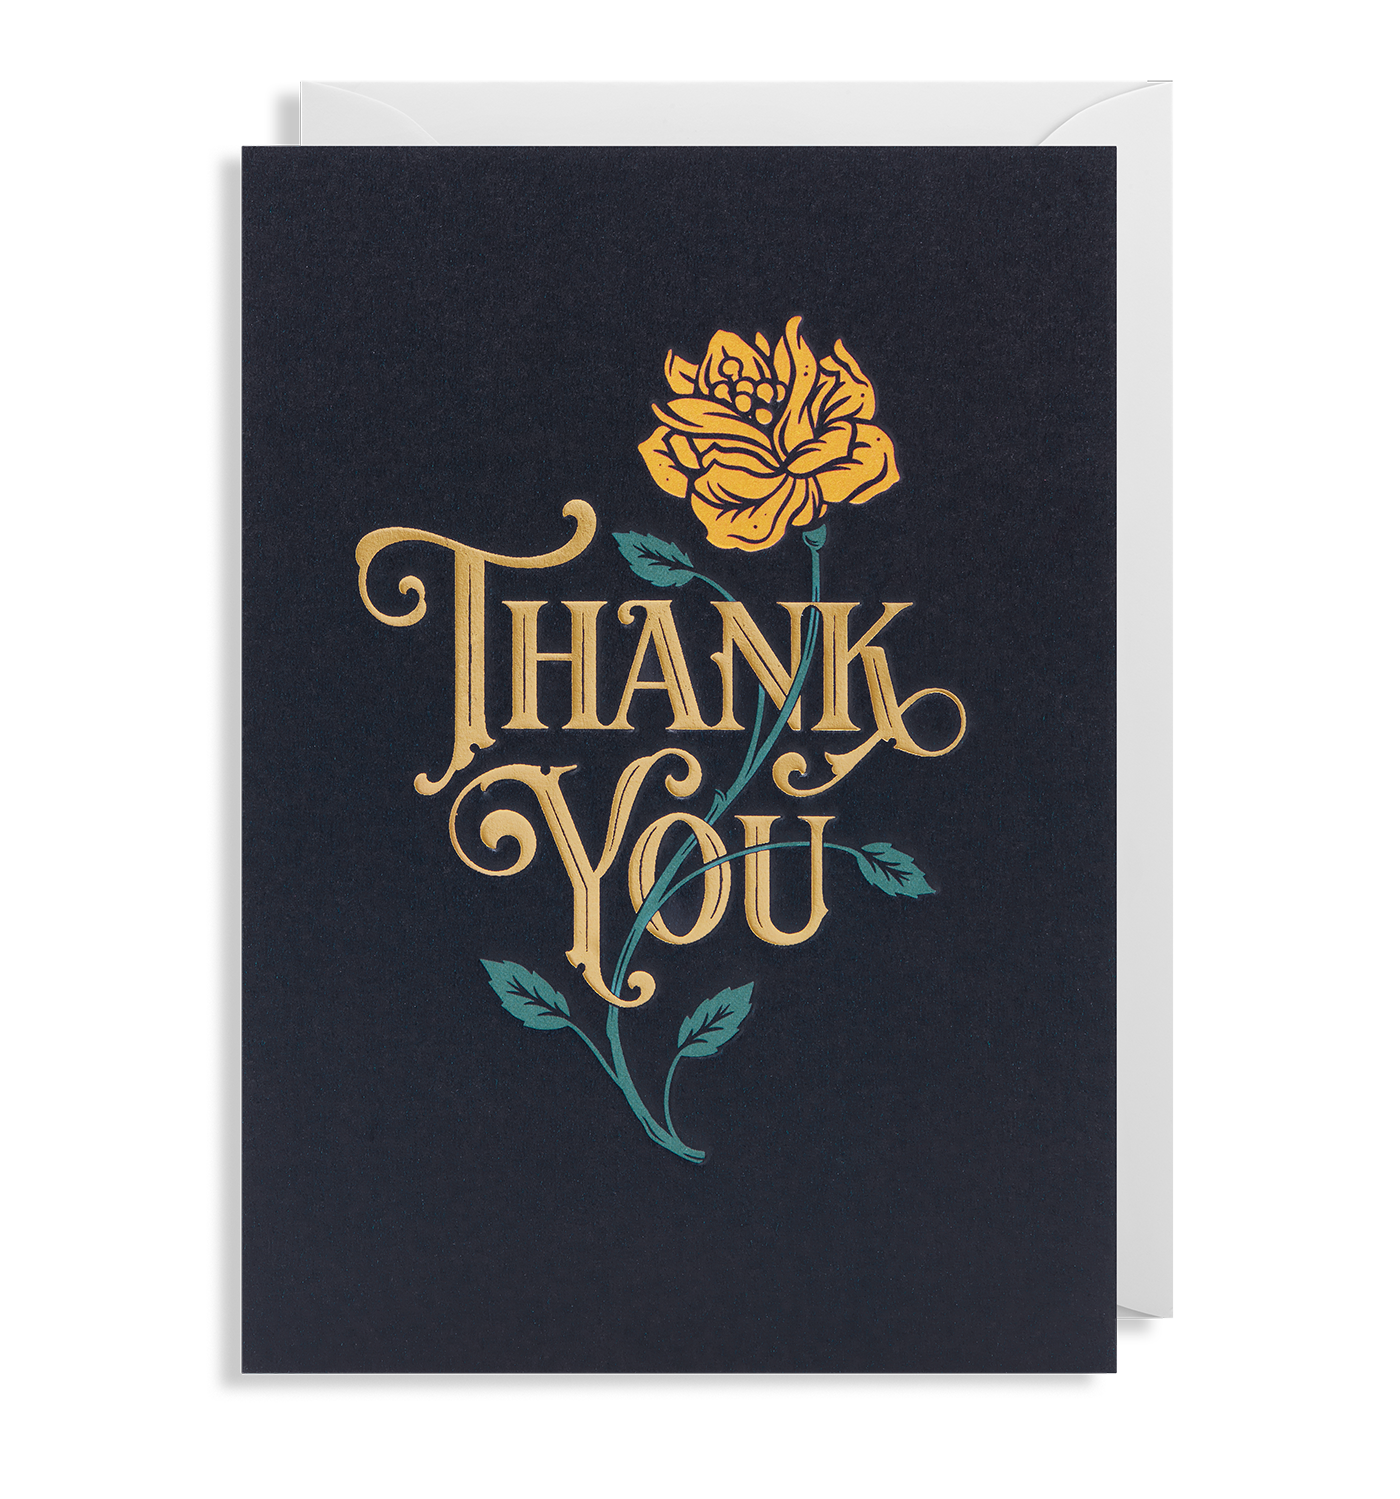 Thank You - Card